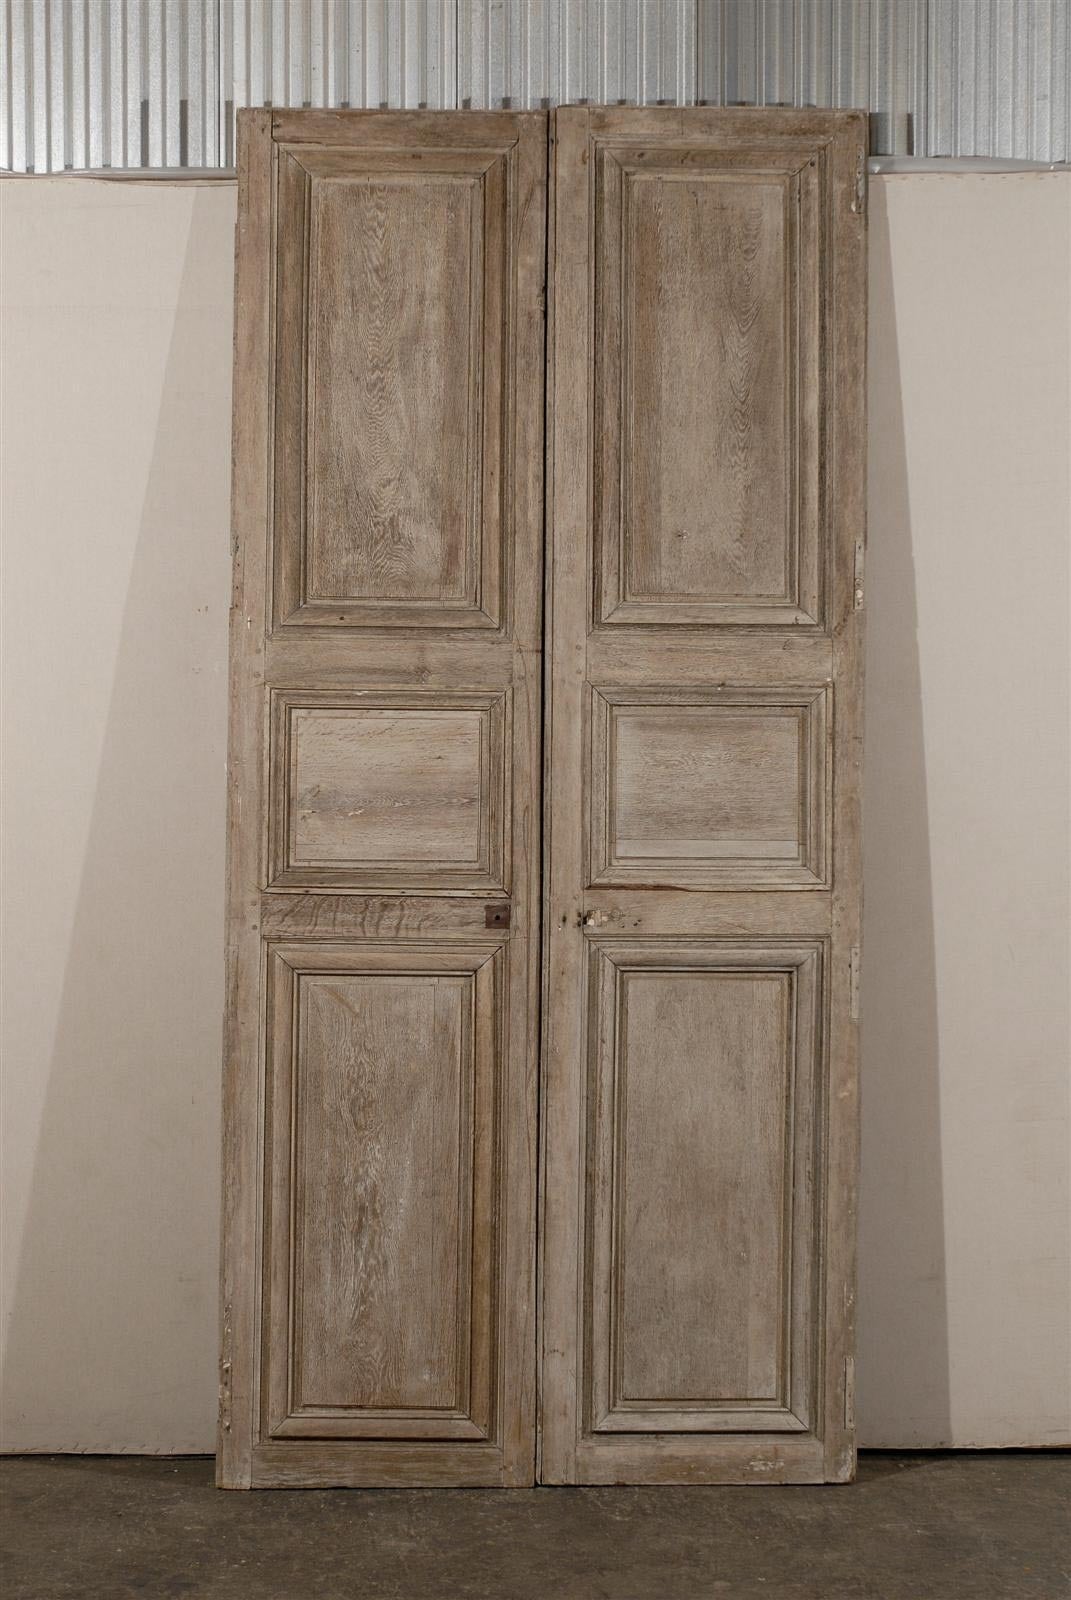 A pair of French 19th century wooden doors made of oakwood. Clean, elegant lines. Would be perfect on a rail.